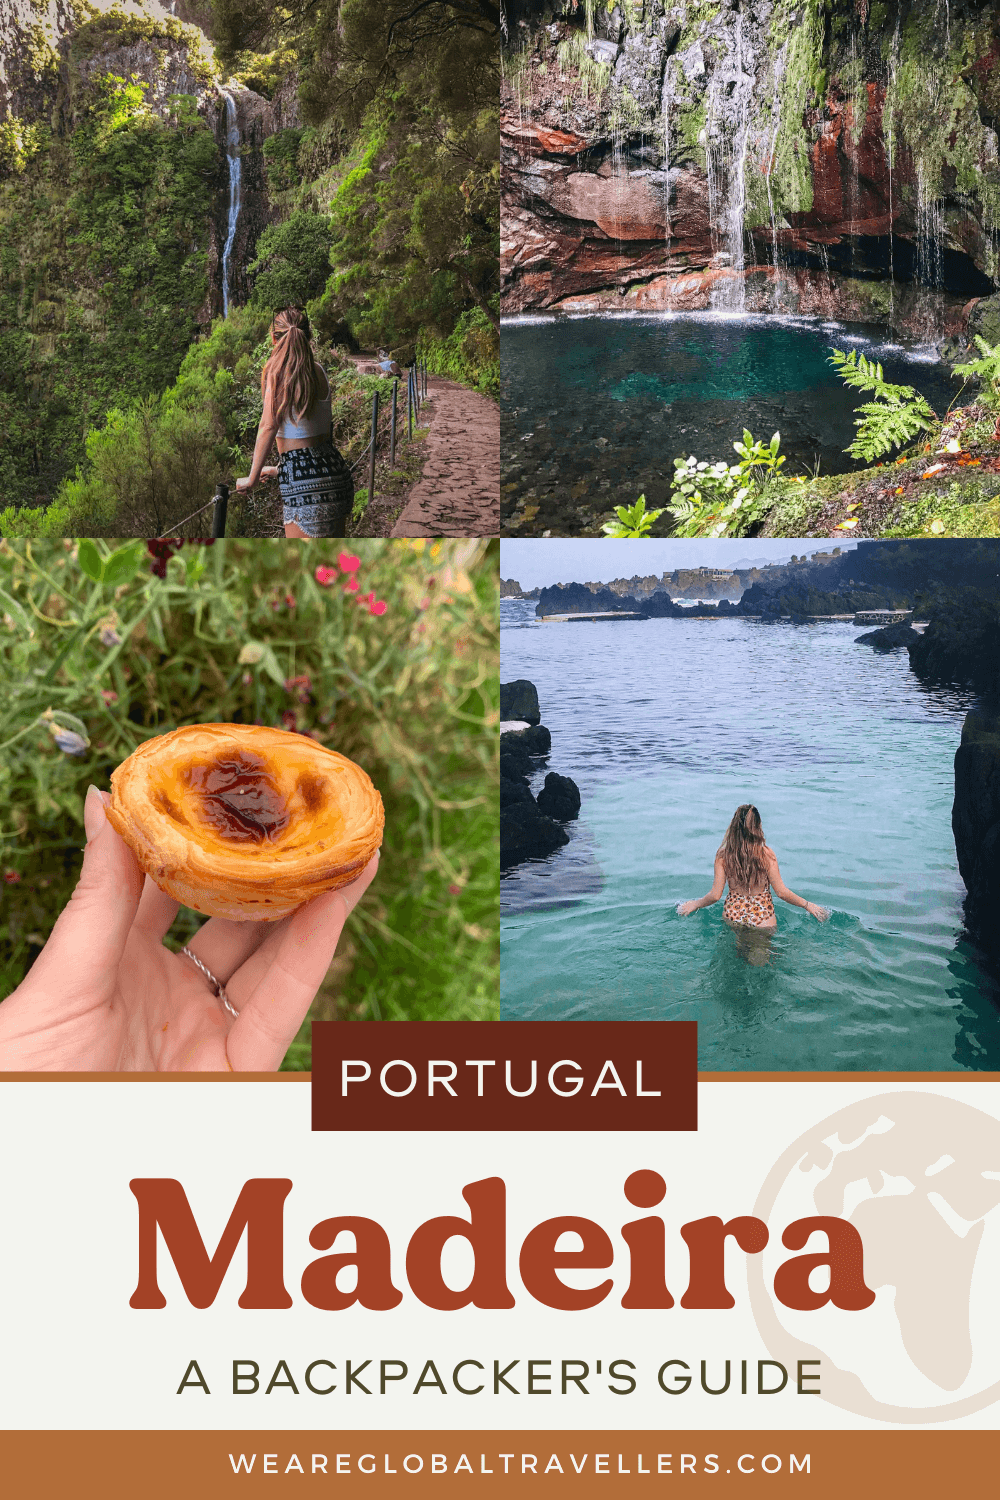 A backpacker's guide to Madeira, Portugal